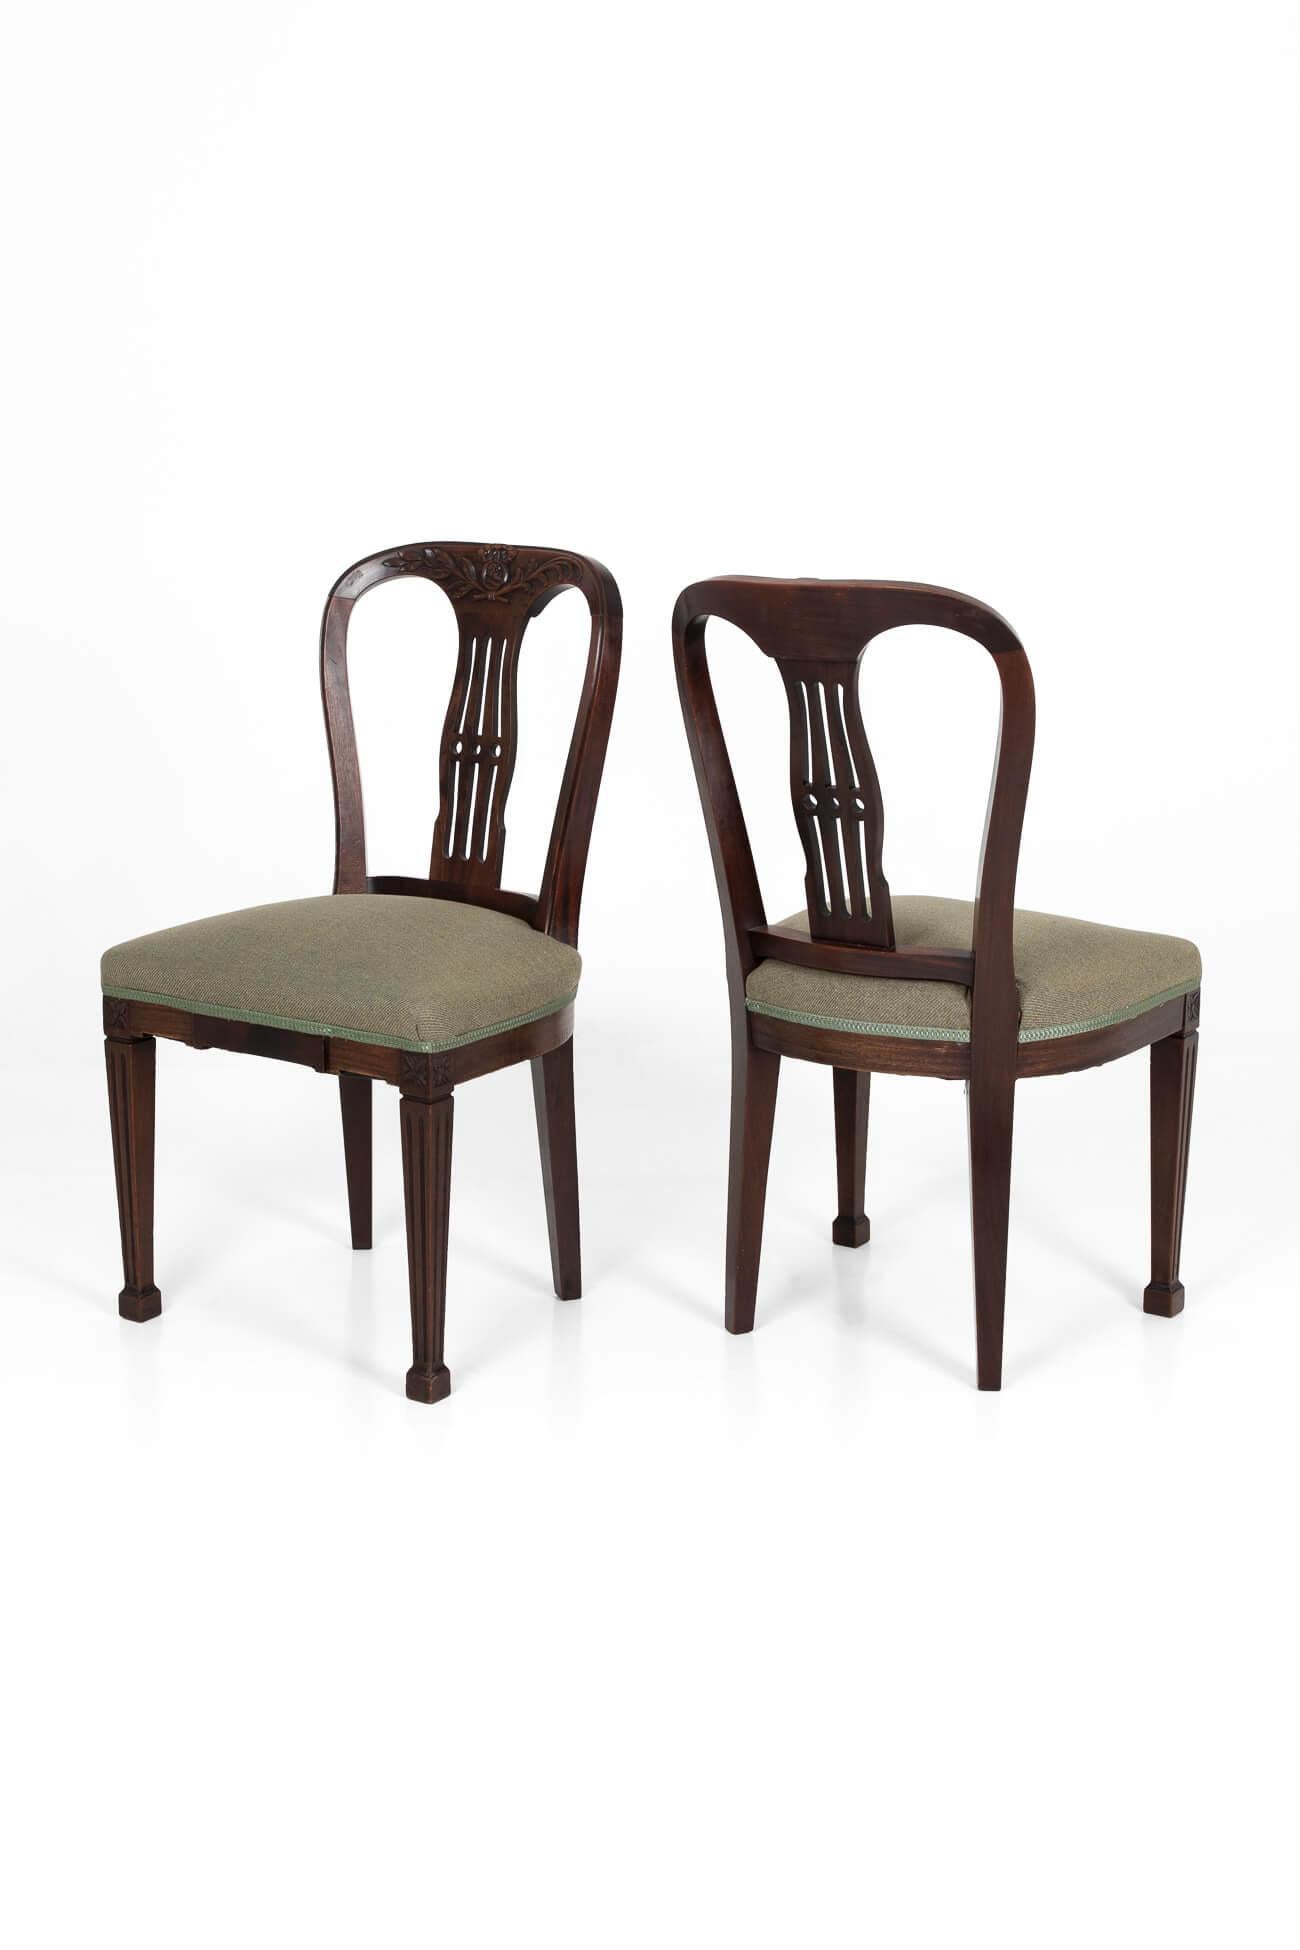 Embroidered Set of 19th Century Mahogany Victorian Dining Chairs, circa 1860 For Sale